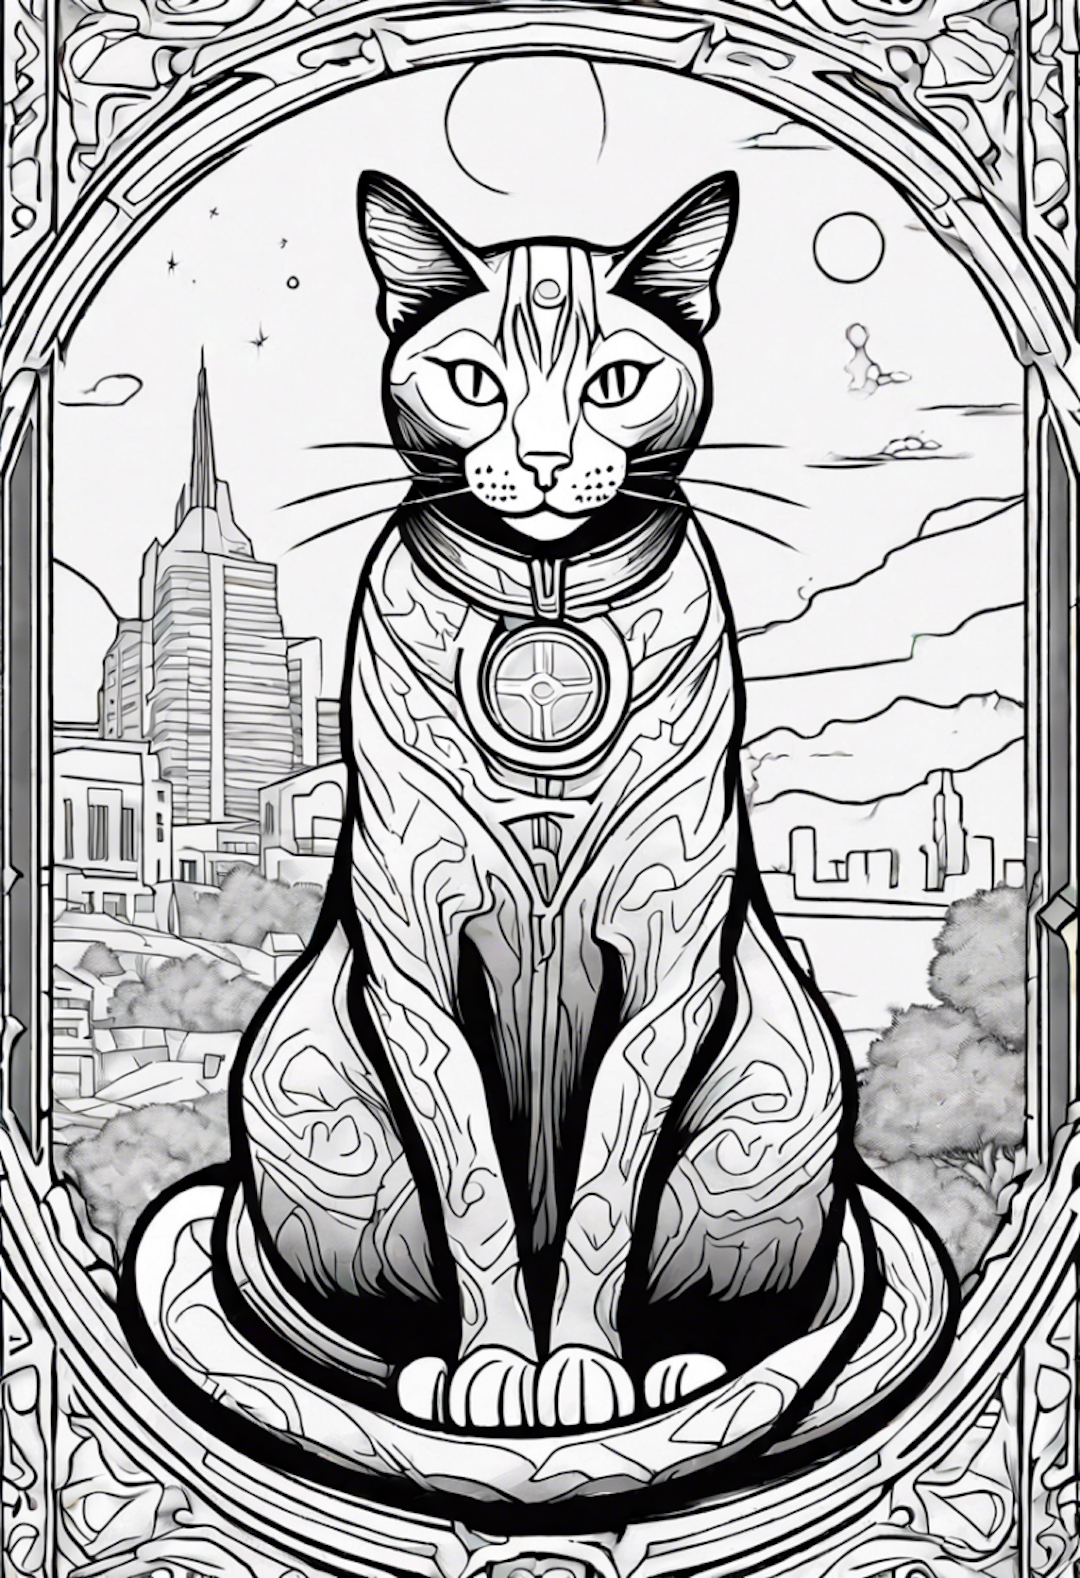 Stained Glass Feline in Urban Setting coloring pages